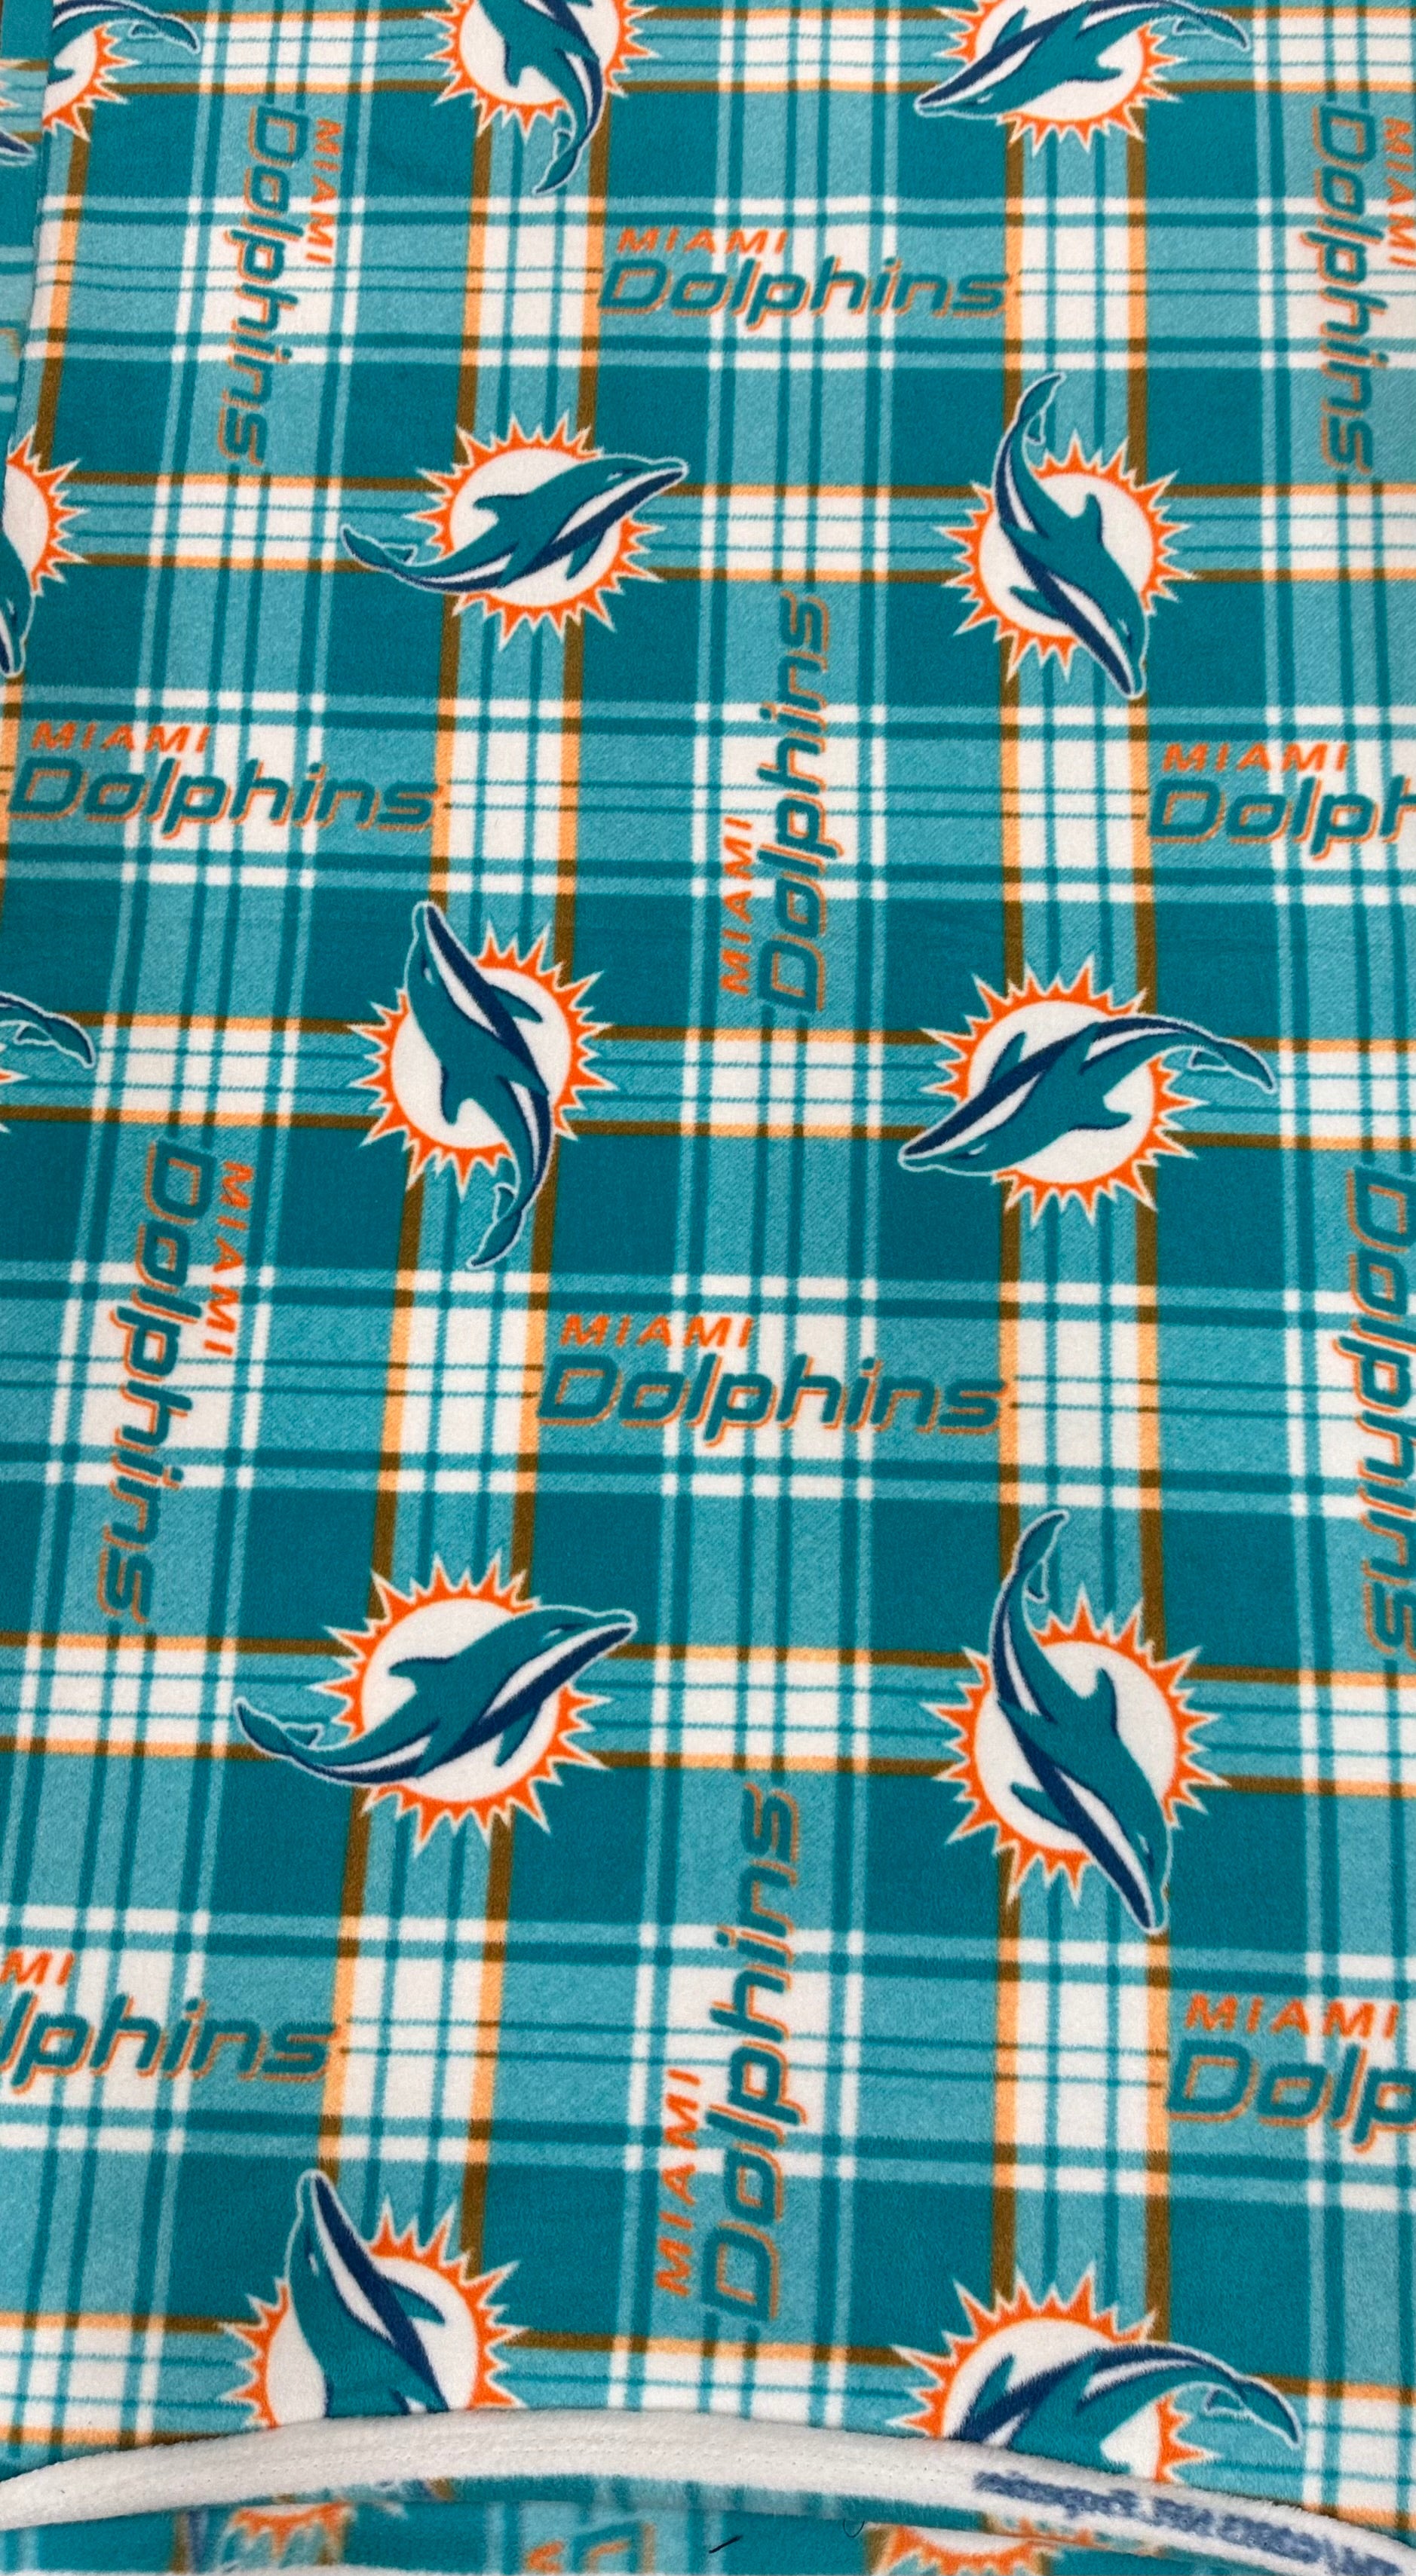 Miami Dolphins Fleece Fabric/ NFL Football Fleece Fabric / Sold By The Yard / 58" Wide /Anti Pill Fleece/ Perfect for Blanket, Bed Spread